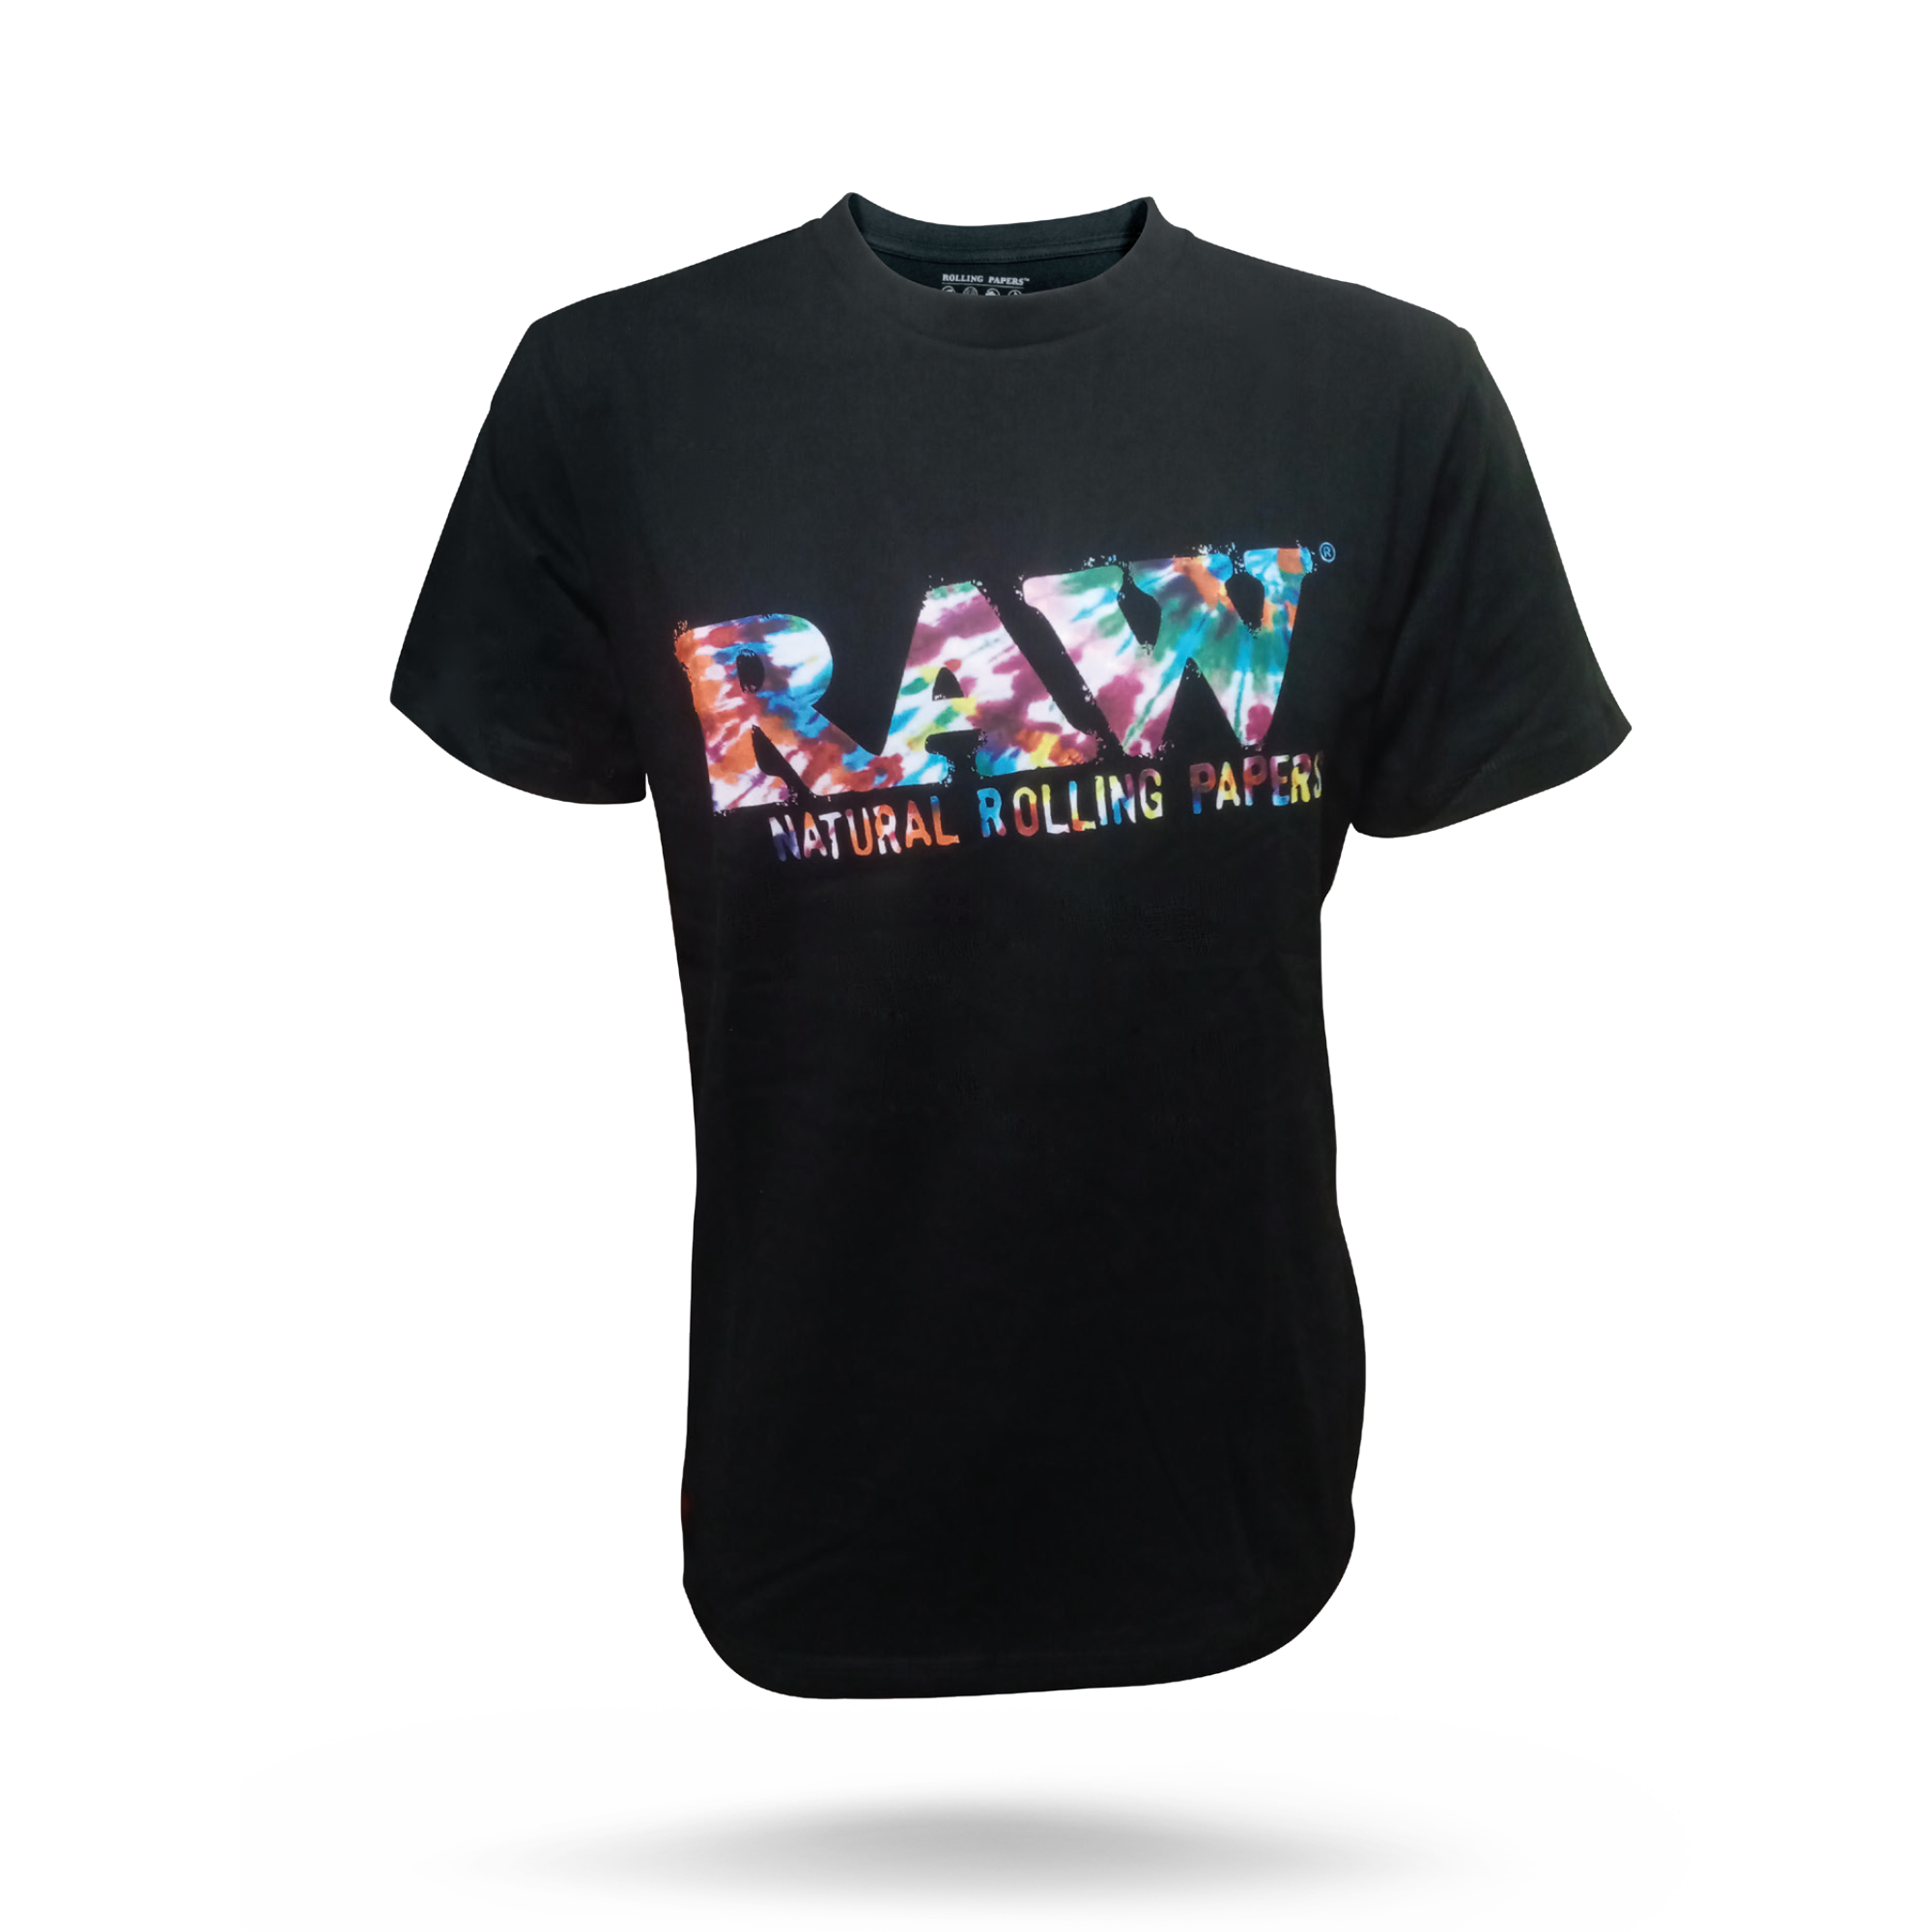 RAW Logo T-Shirt | Tie Dye Clothing Accessories esd-official